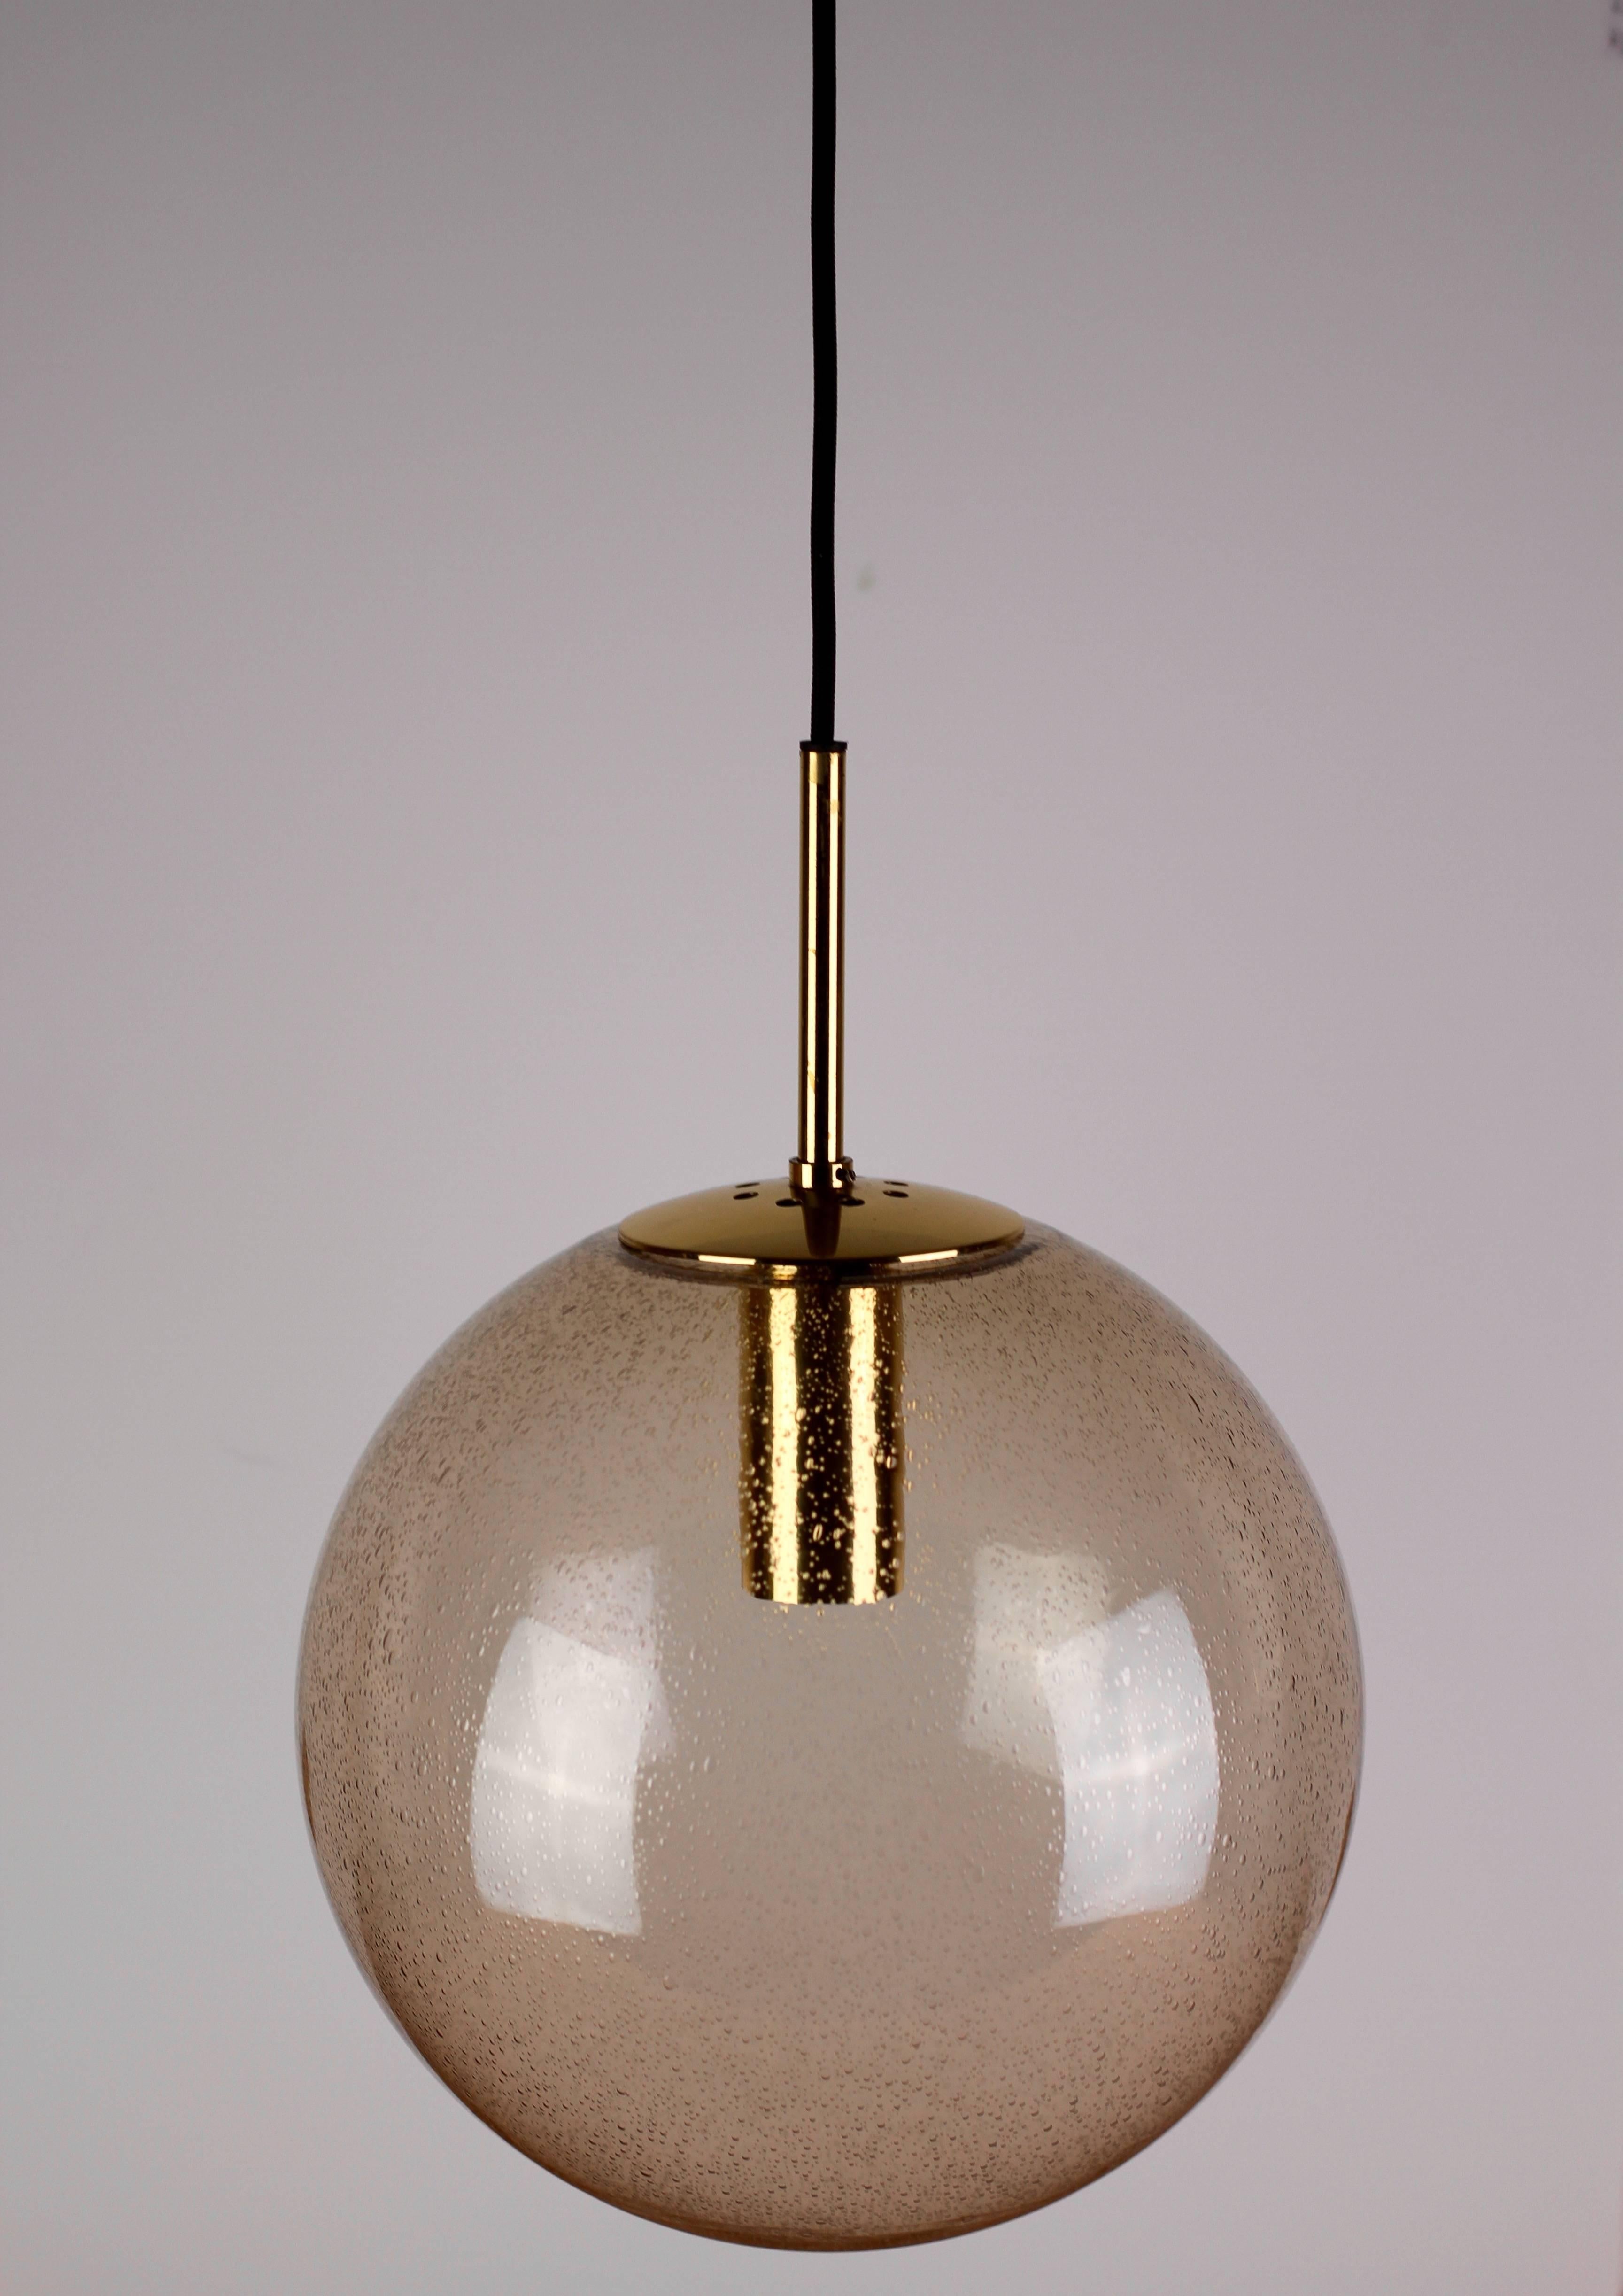 A large Mid-Century hanging pendant light by Glashütte Limburg. Made in the late 1960s throughout to the late 1970s, this gorgeous light features a mouth blown smoked glass globe containing many tiny bubbles resembling water droplets. All hardeware